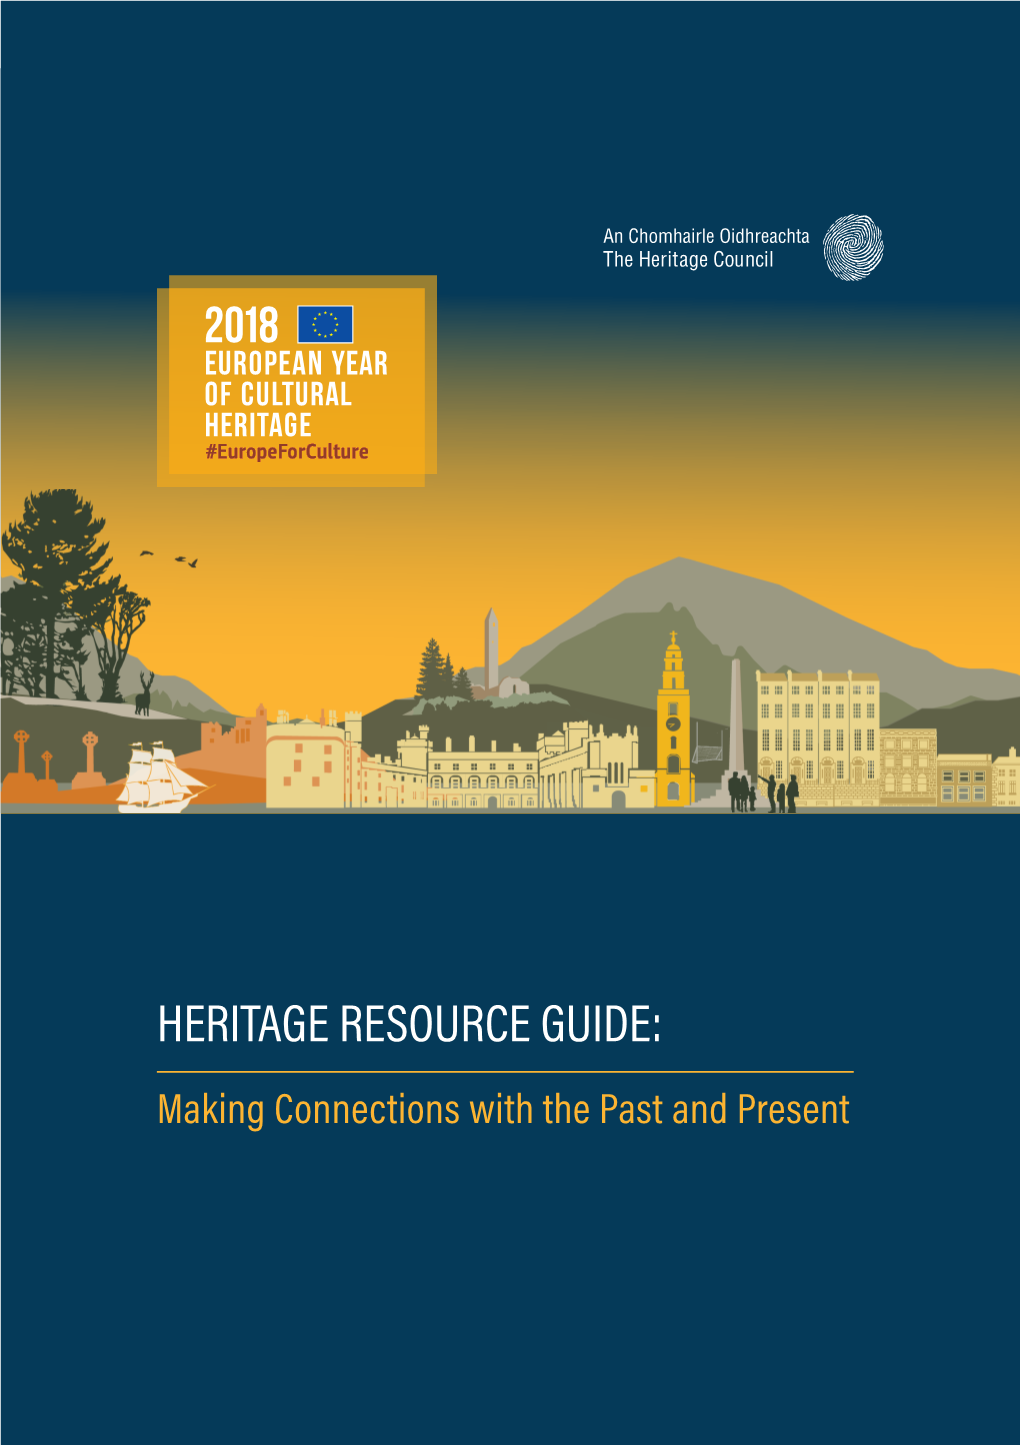 HERITAGE RESOURCE GUIDE: Making Connections with the Past and Present HERITAGE RESOURCE GUIDE Making Connections with the Past and Present Introduction